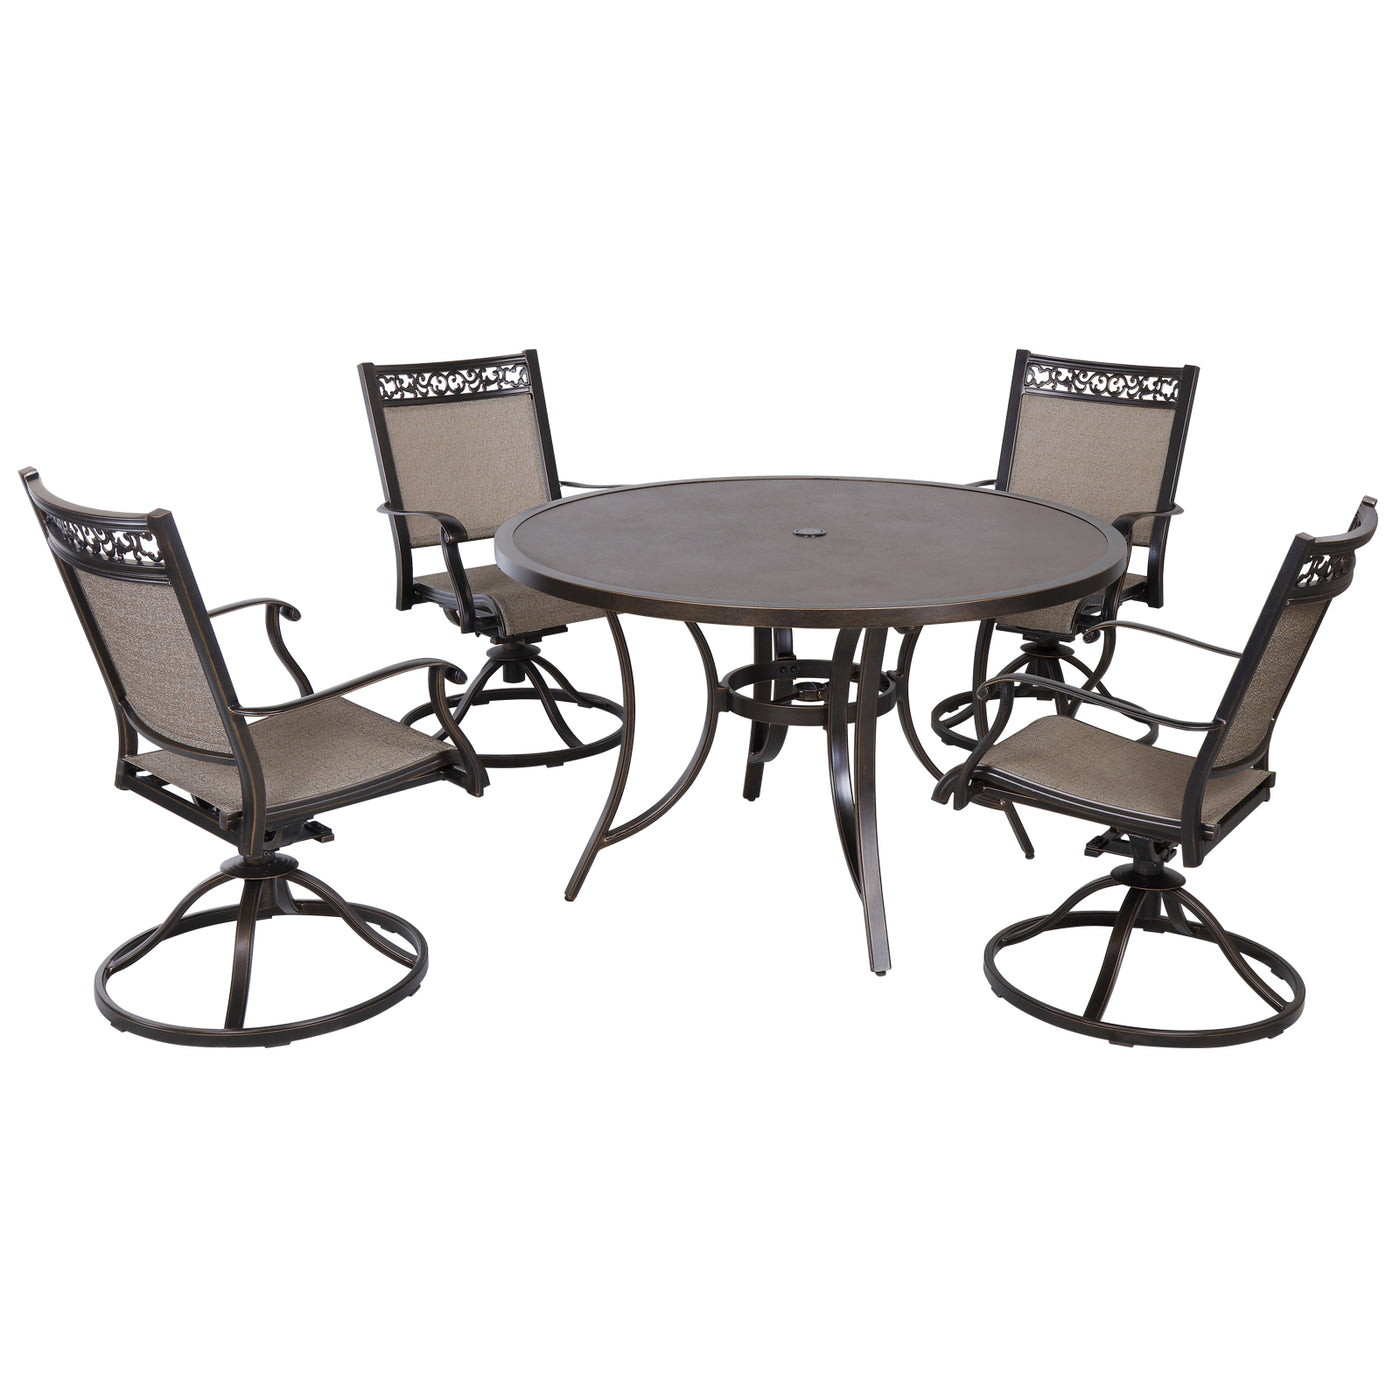 5PCS Furniture Set Patio 48" Round Dining Table & 4PCS Sling Fabric Swivel Chair